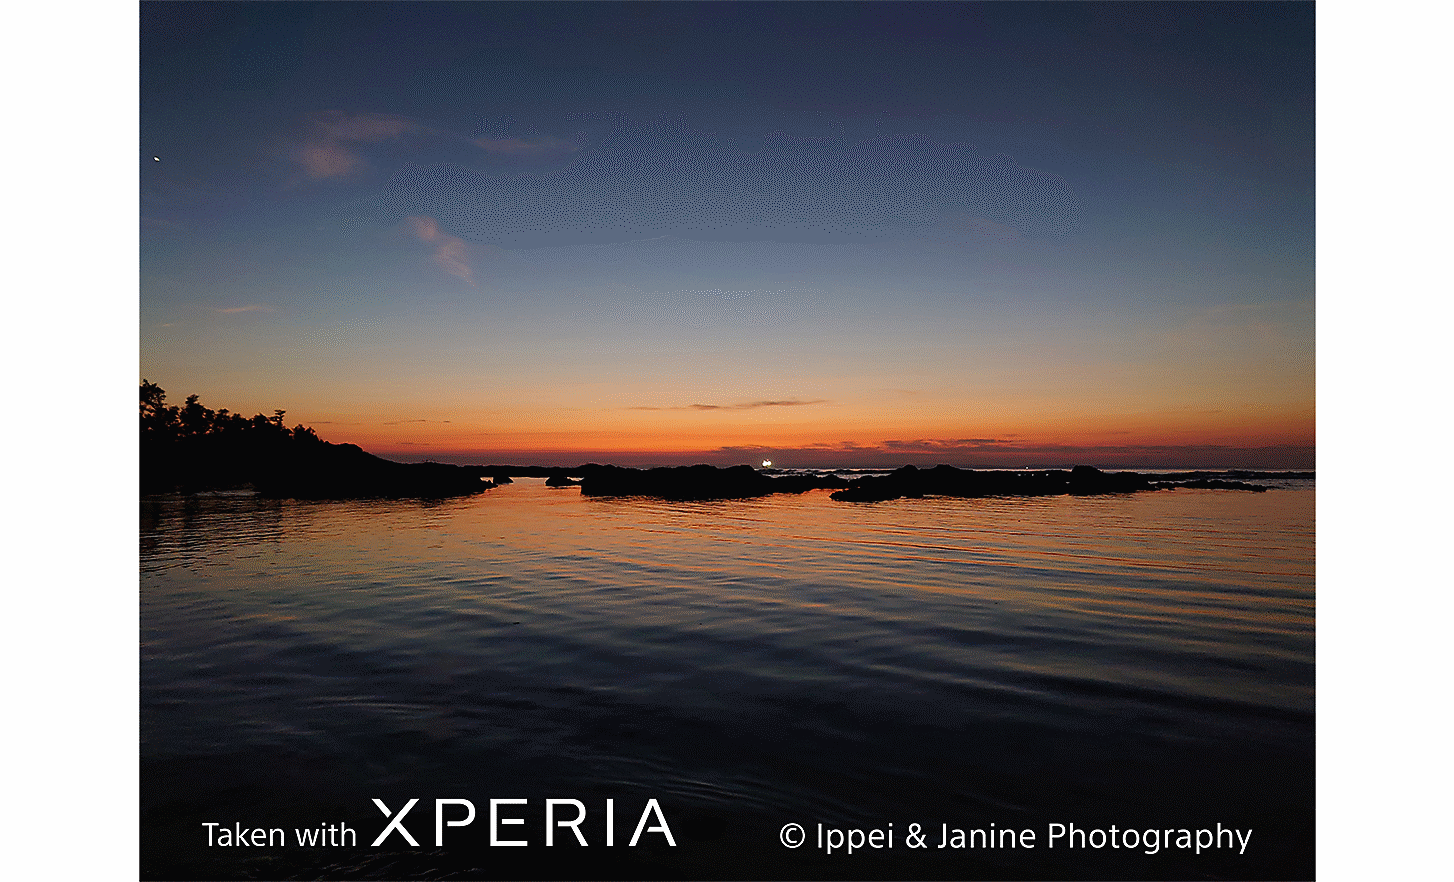 Sunset view over a large body of water. Text reads "Taken with Xperia ©Ippei & Janine Photography".